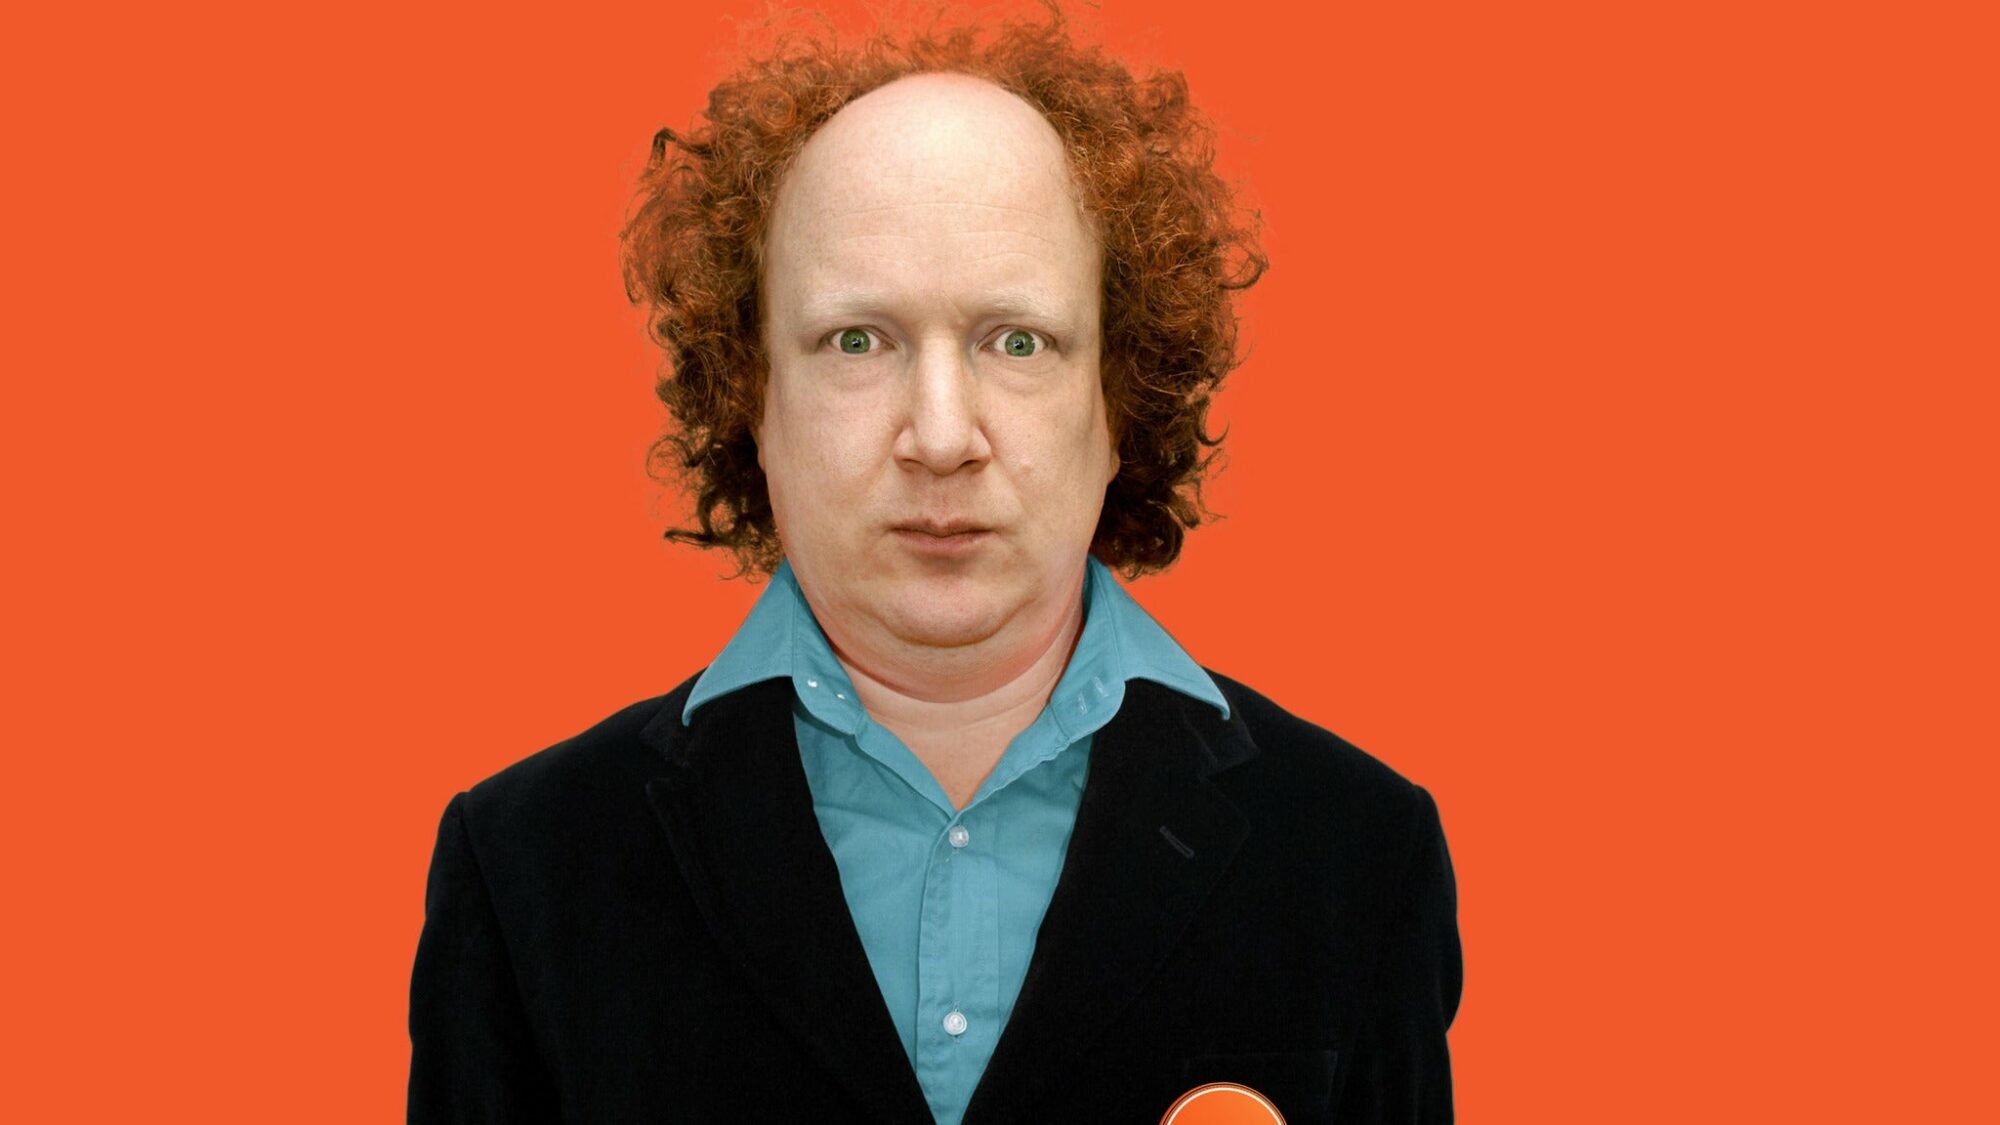 Image name Andy Zaltzman Satirist For Hire at Wardrobe Leeds the 16 image from the post Andy Zaltzman: Satirist For Hire at Wardrobe, Leeds in Yorkshire.com.